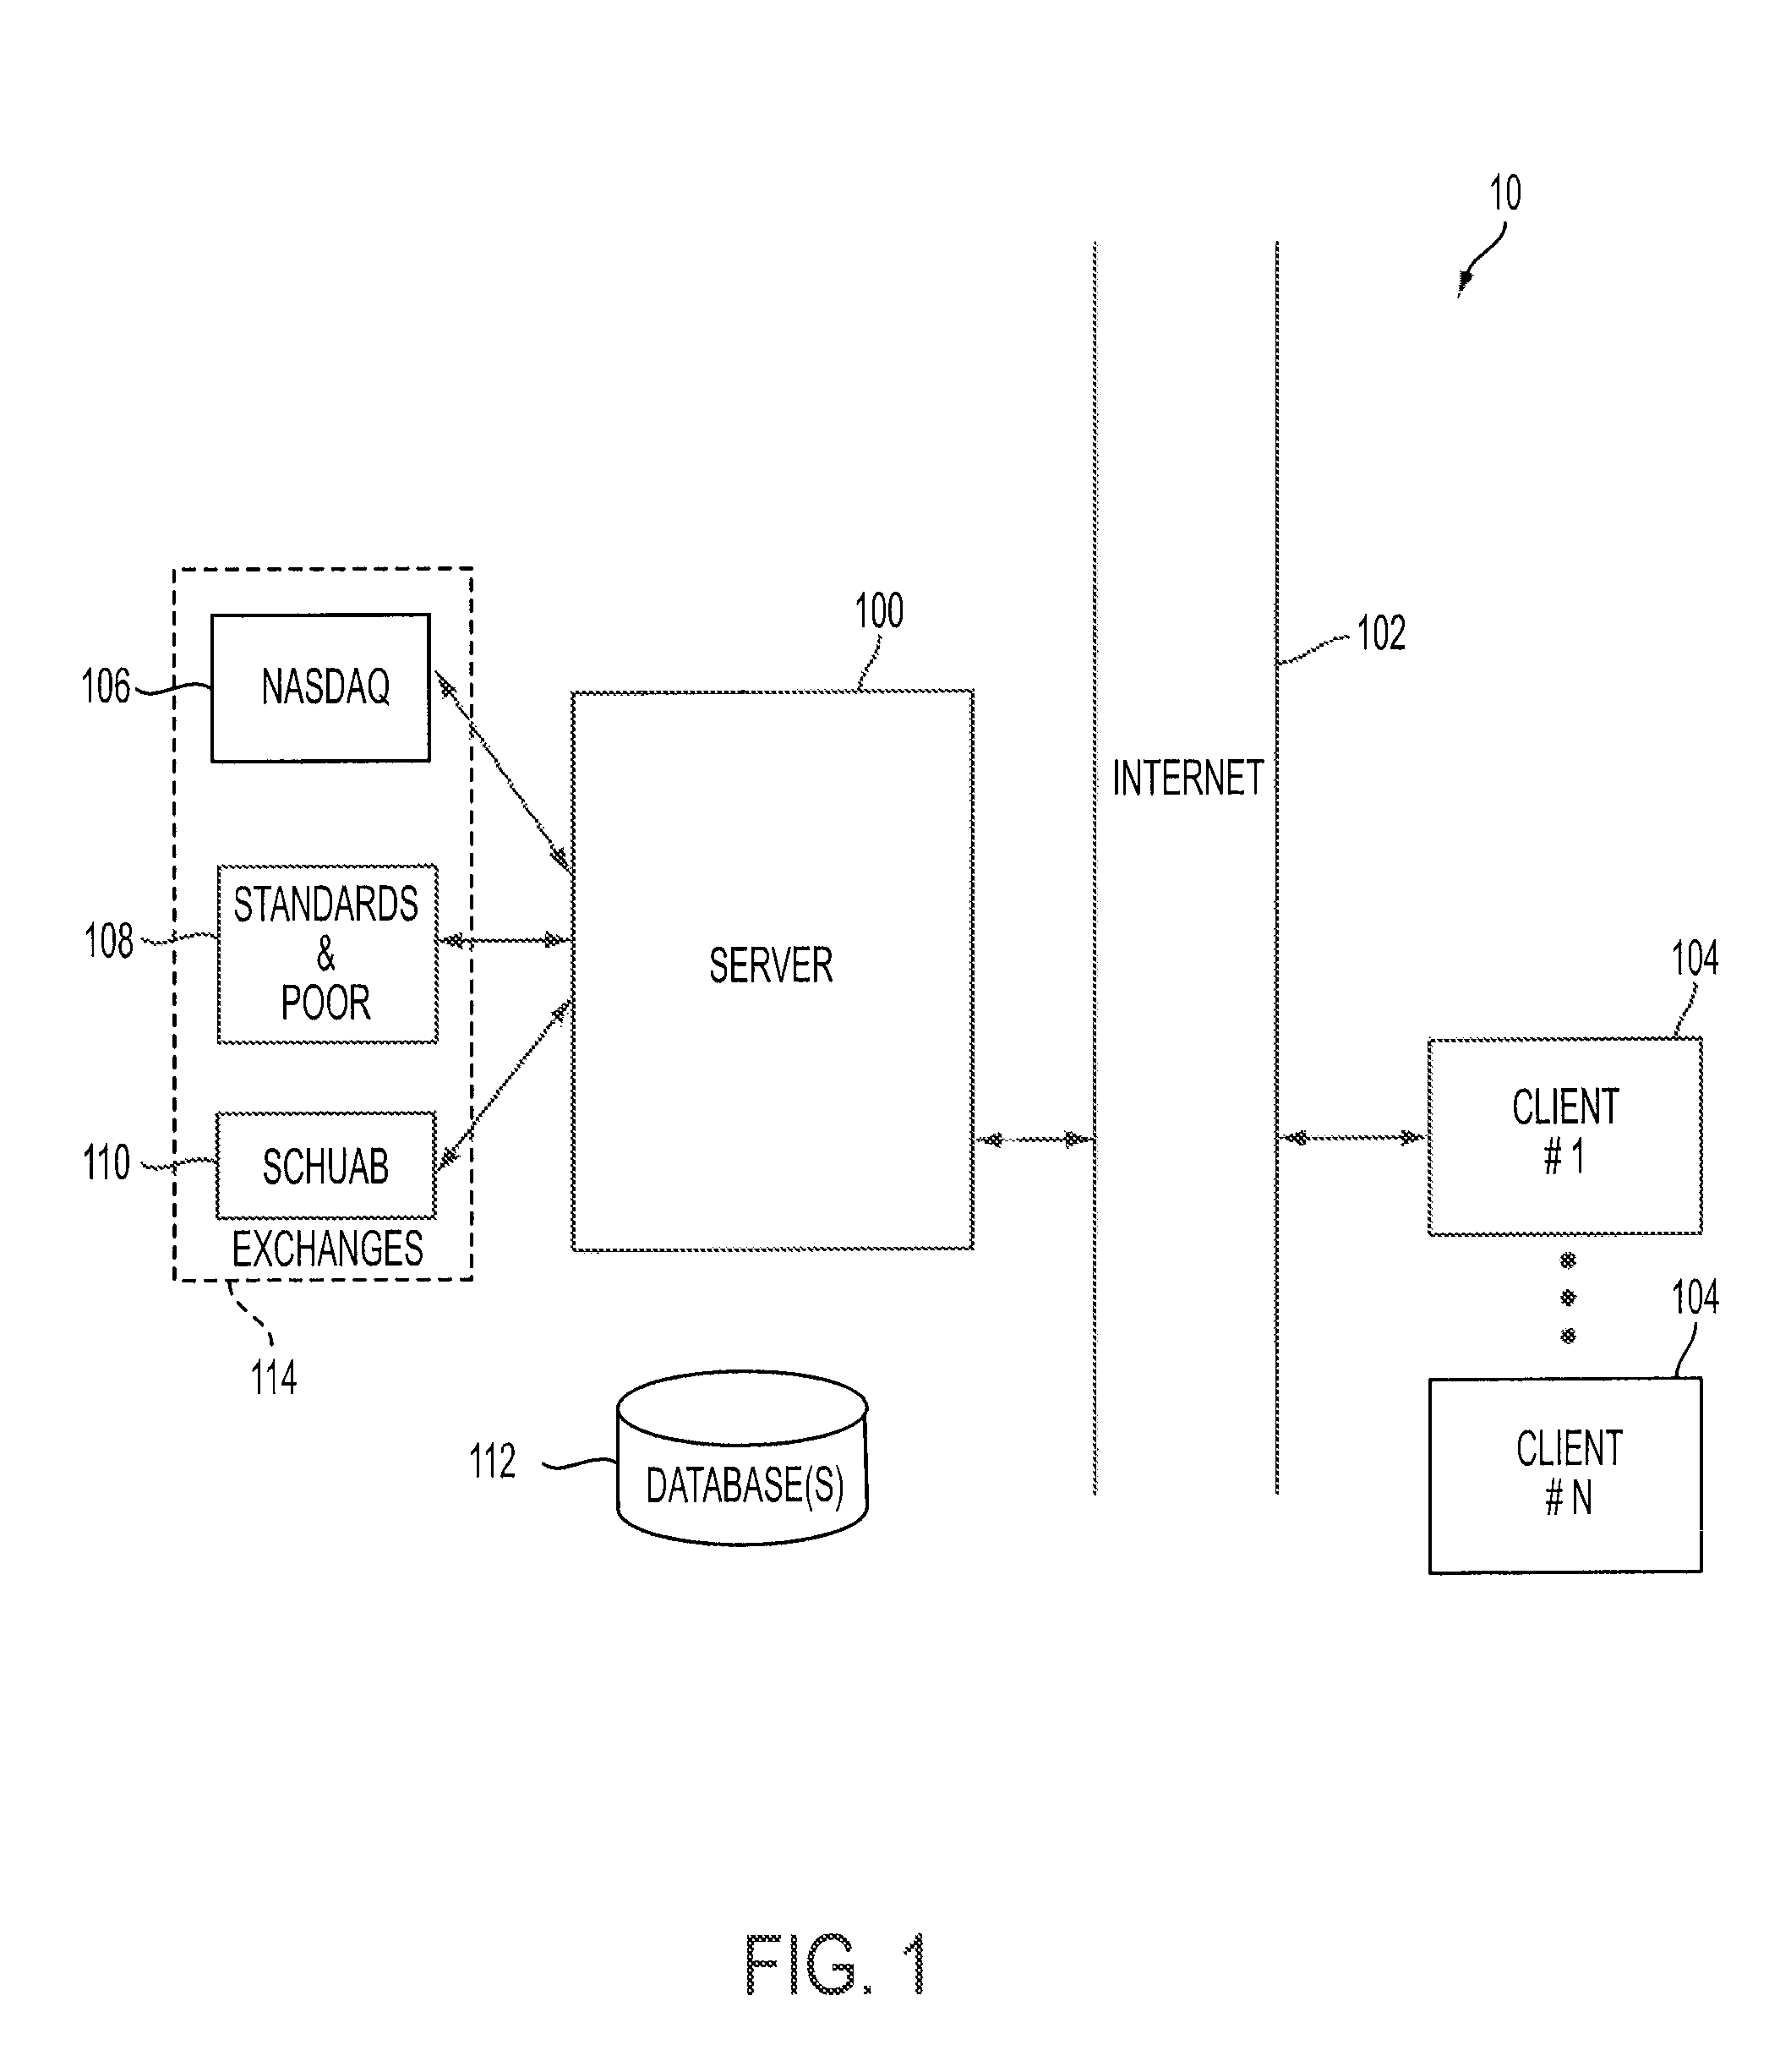 Method and system for analyzing and screening investment information